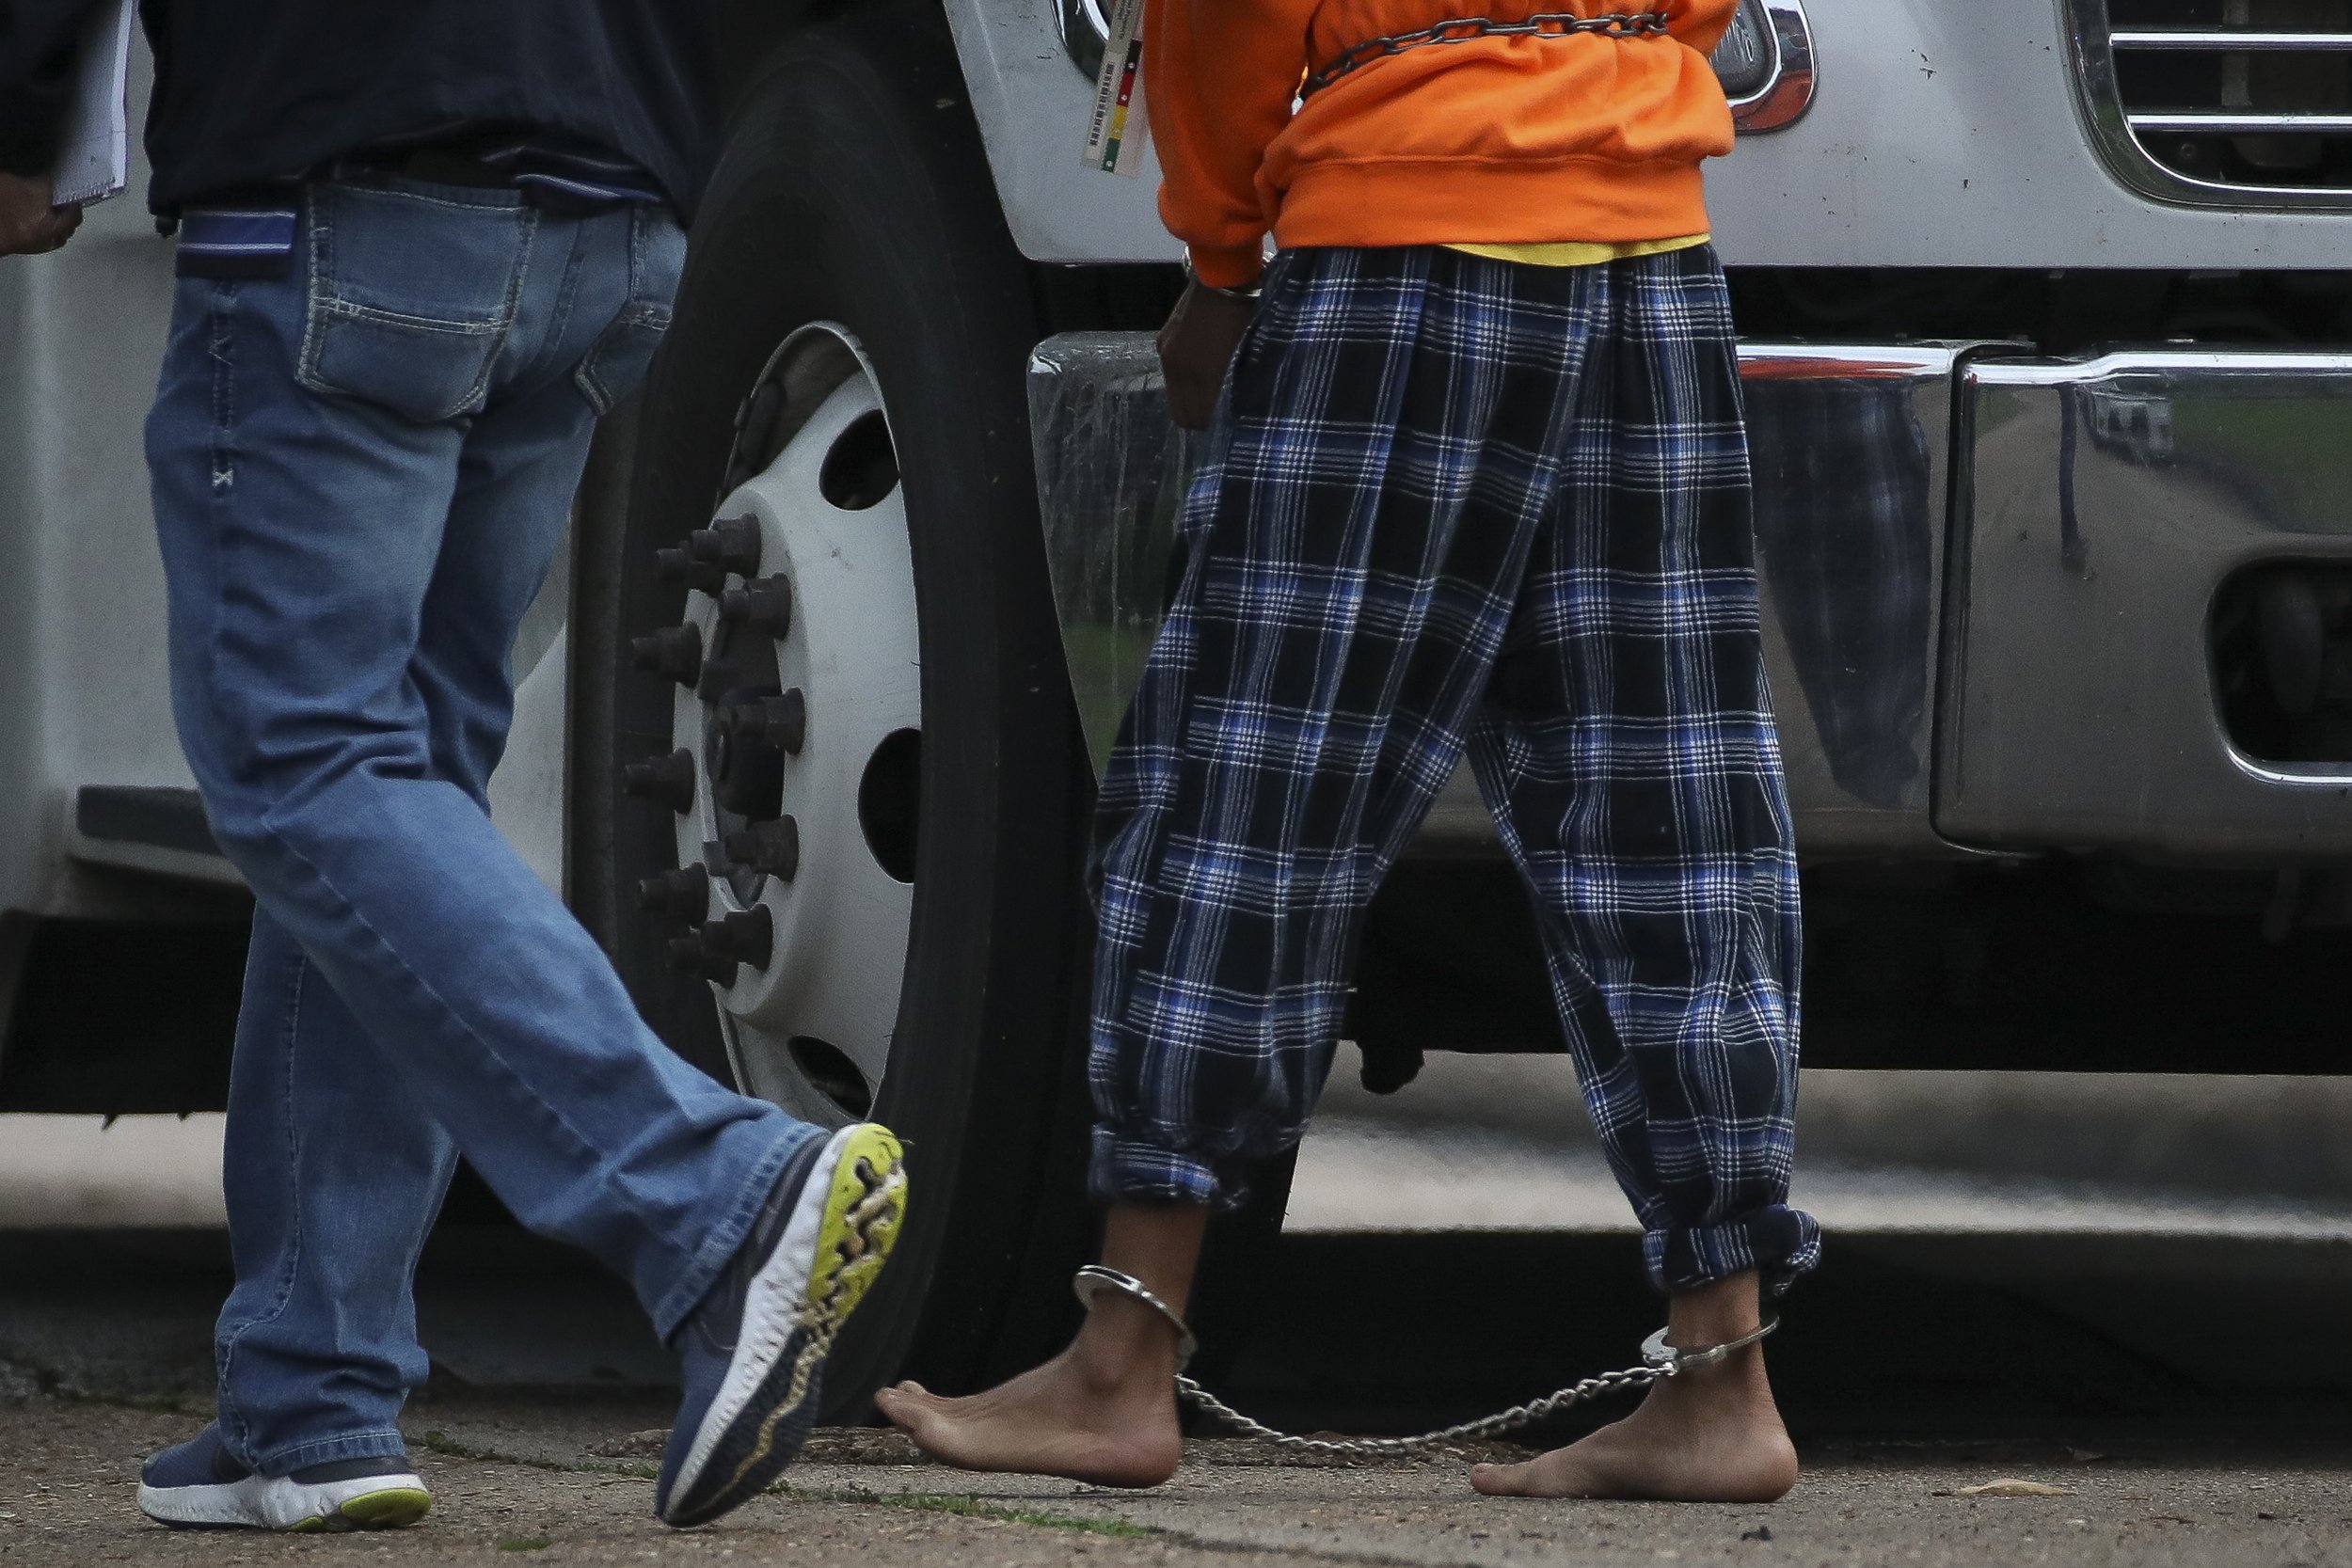  An undocumented migrant is ushered into a bus from the scene of a human smuggling case, where more than 90 undocumented migrants were found inside a home on the 12200 block of Chessington Drive, on Friday, April 30, 2021, in Houston, Texas. A Housto